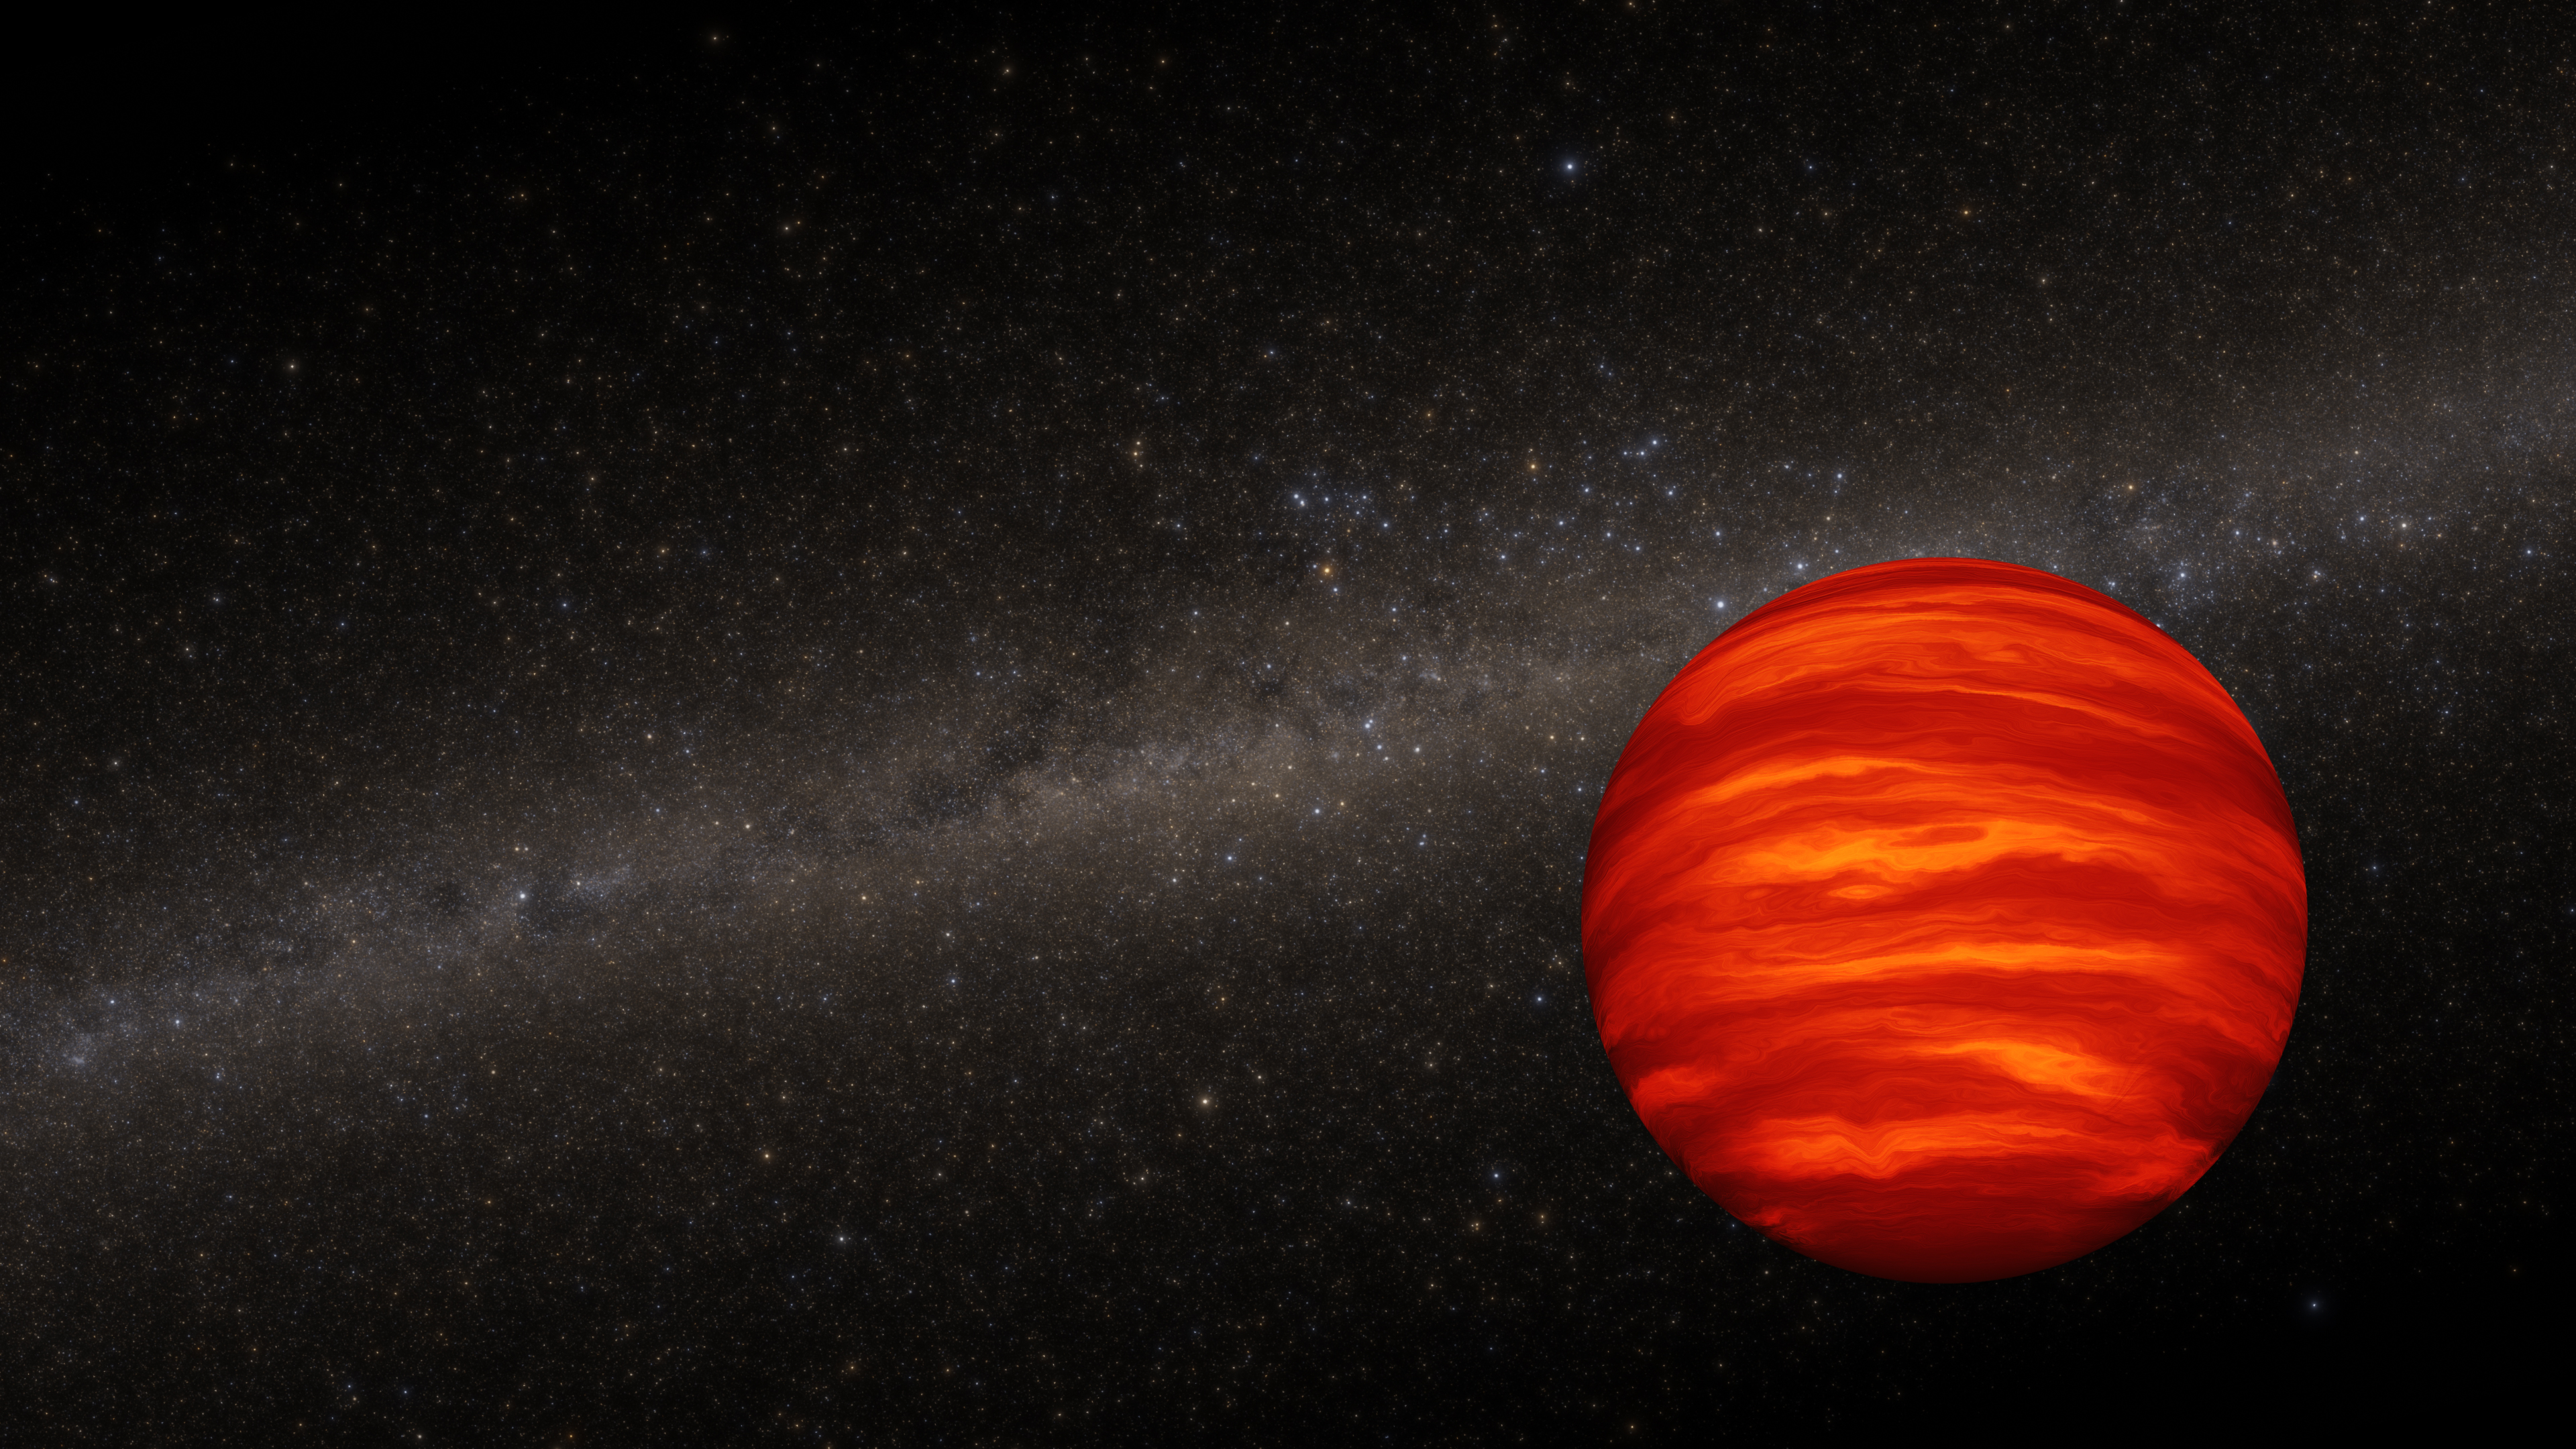 This artist's concept shows a brown dwarf, an object more massive than a planet but smaller than a star. The dwarf is a cherry-red sphere. It has horizontal stripes of various shades of red that are cloud bands. In the dark background there are myriad stars that are inside our Milky Way galaxy.